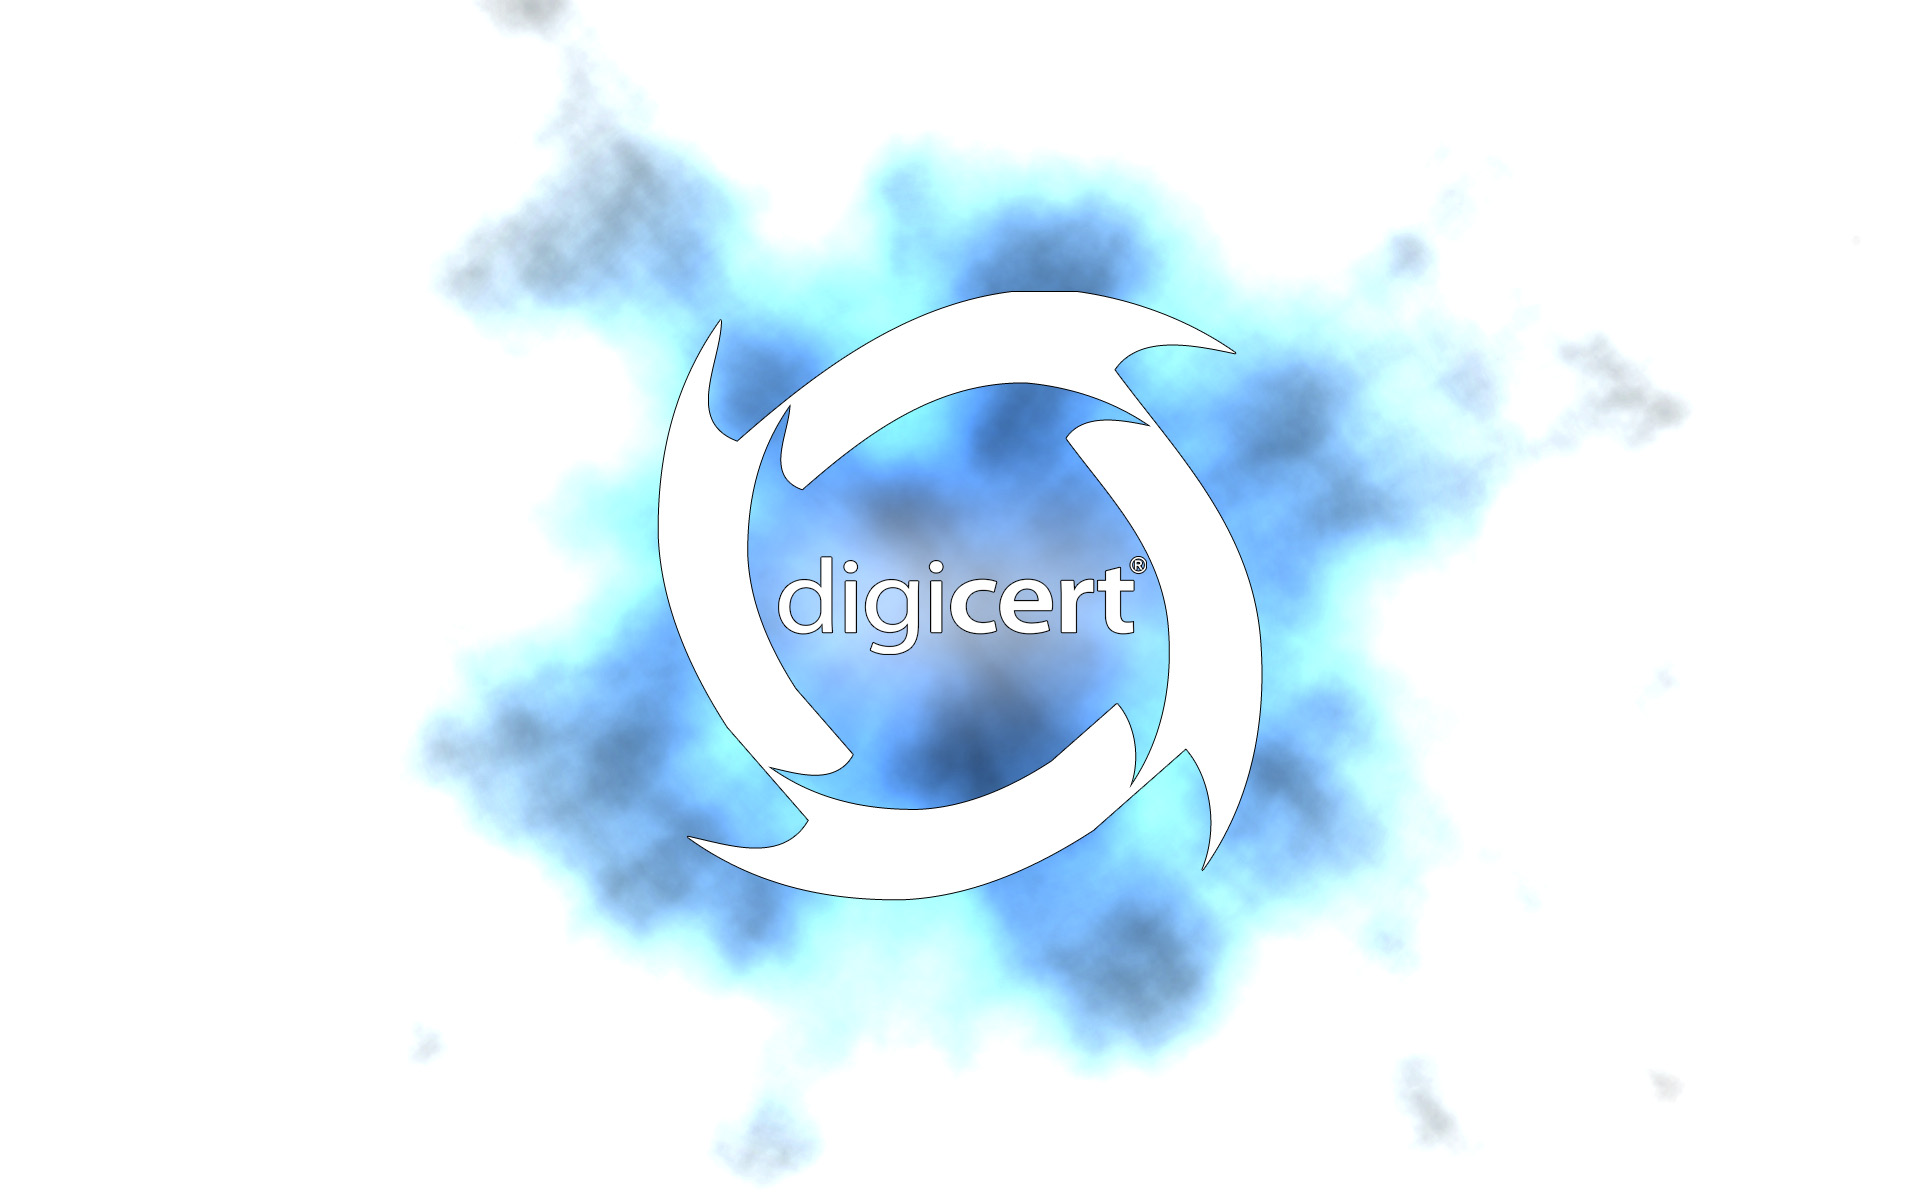 Digicert Wallpaper Background And Other Graphics